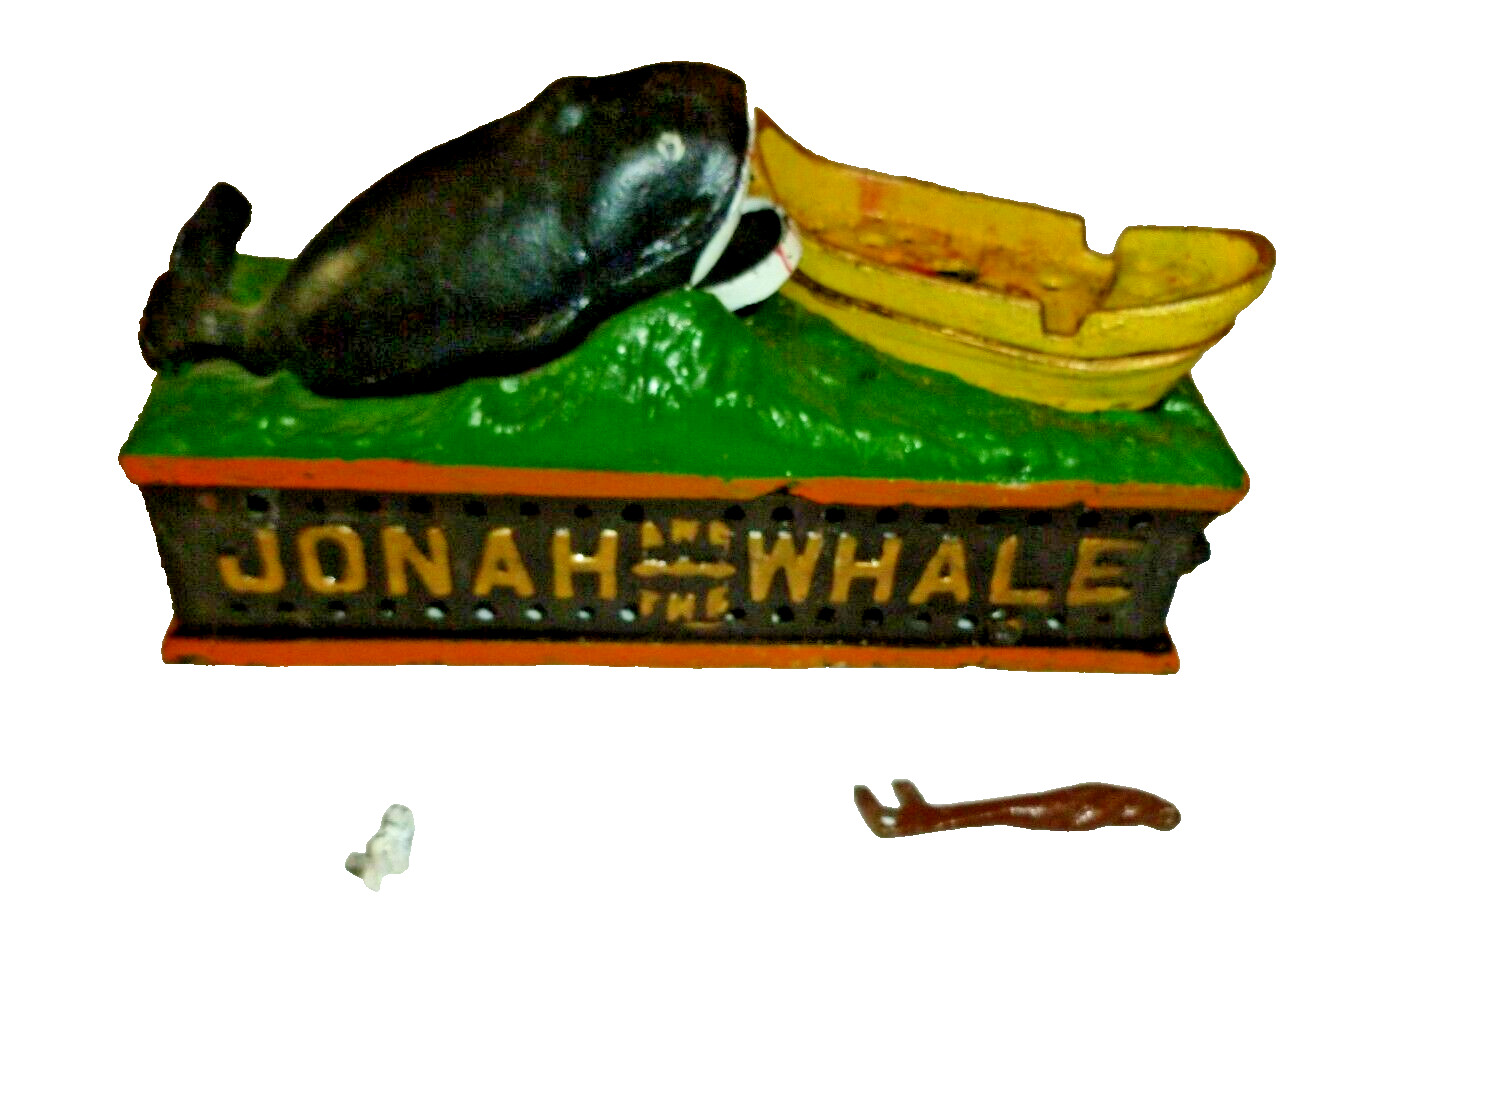 Vintage Jonah  Whale Cast Iron Penny Coin Mechanical Bank parts repair Taiwan